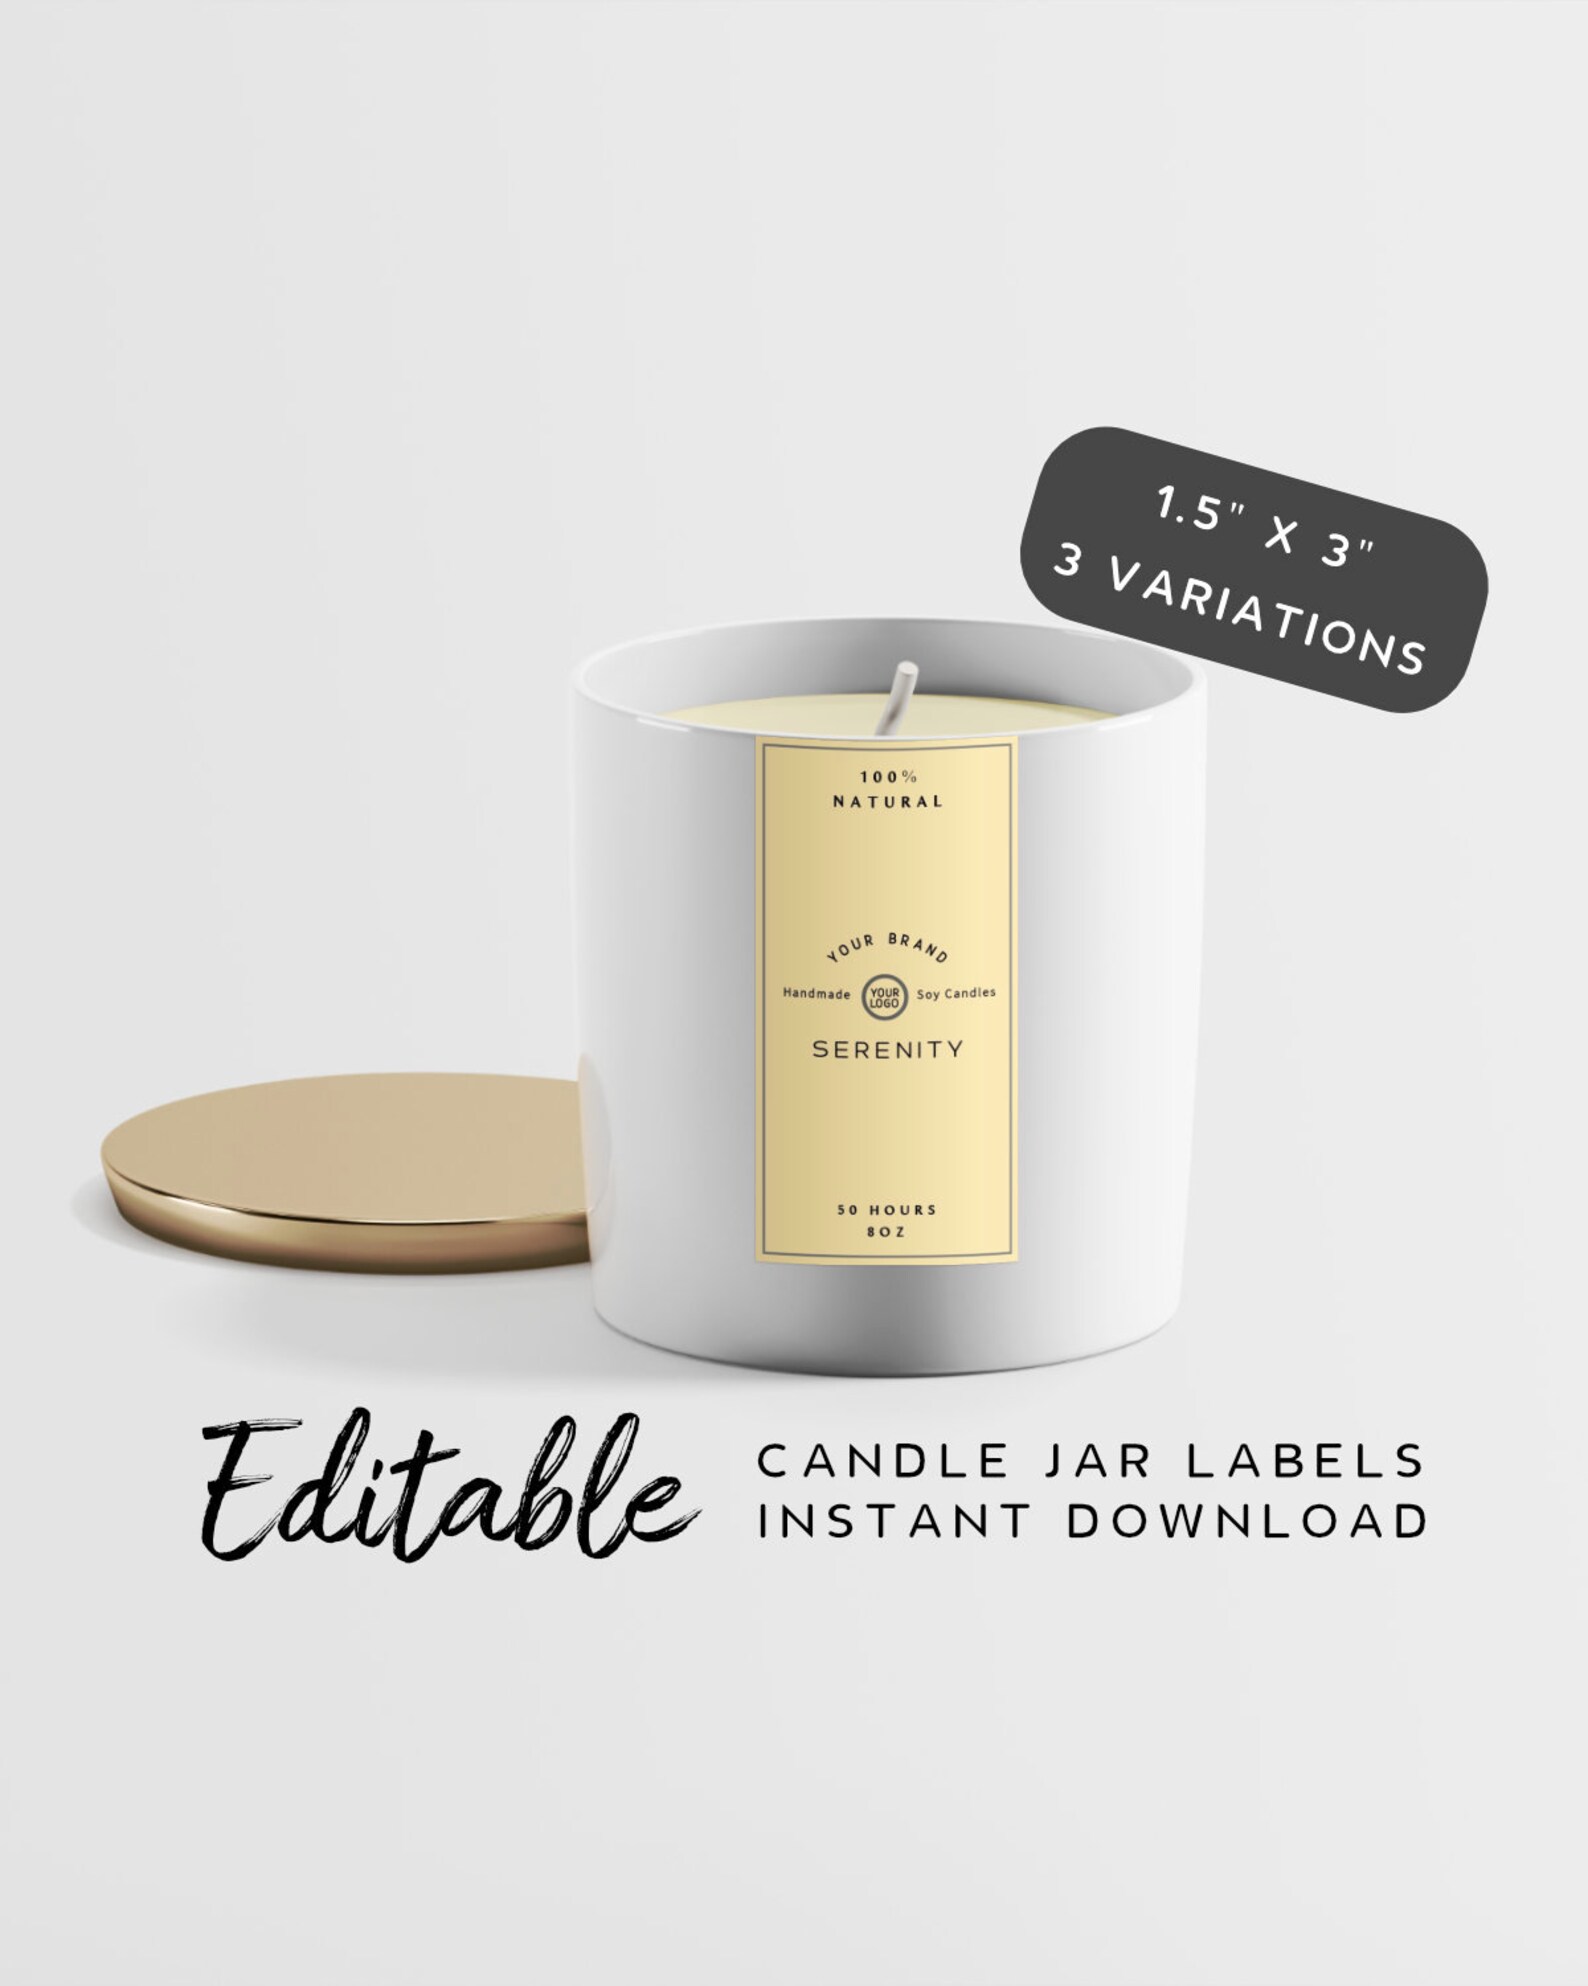 Editable Candle Jar Label Product Label for Candle Label | Etsy